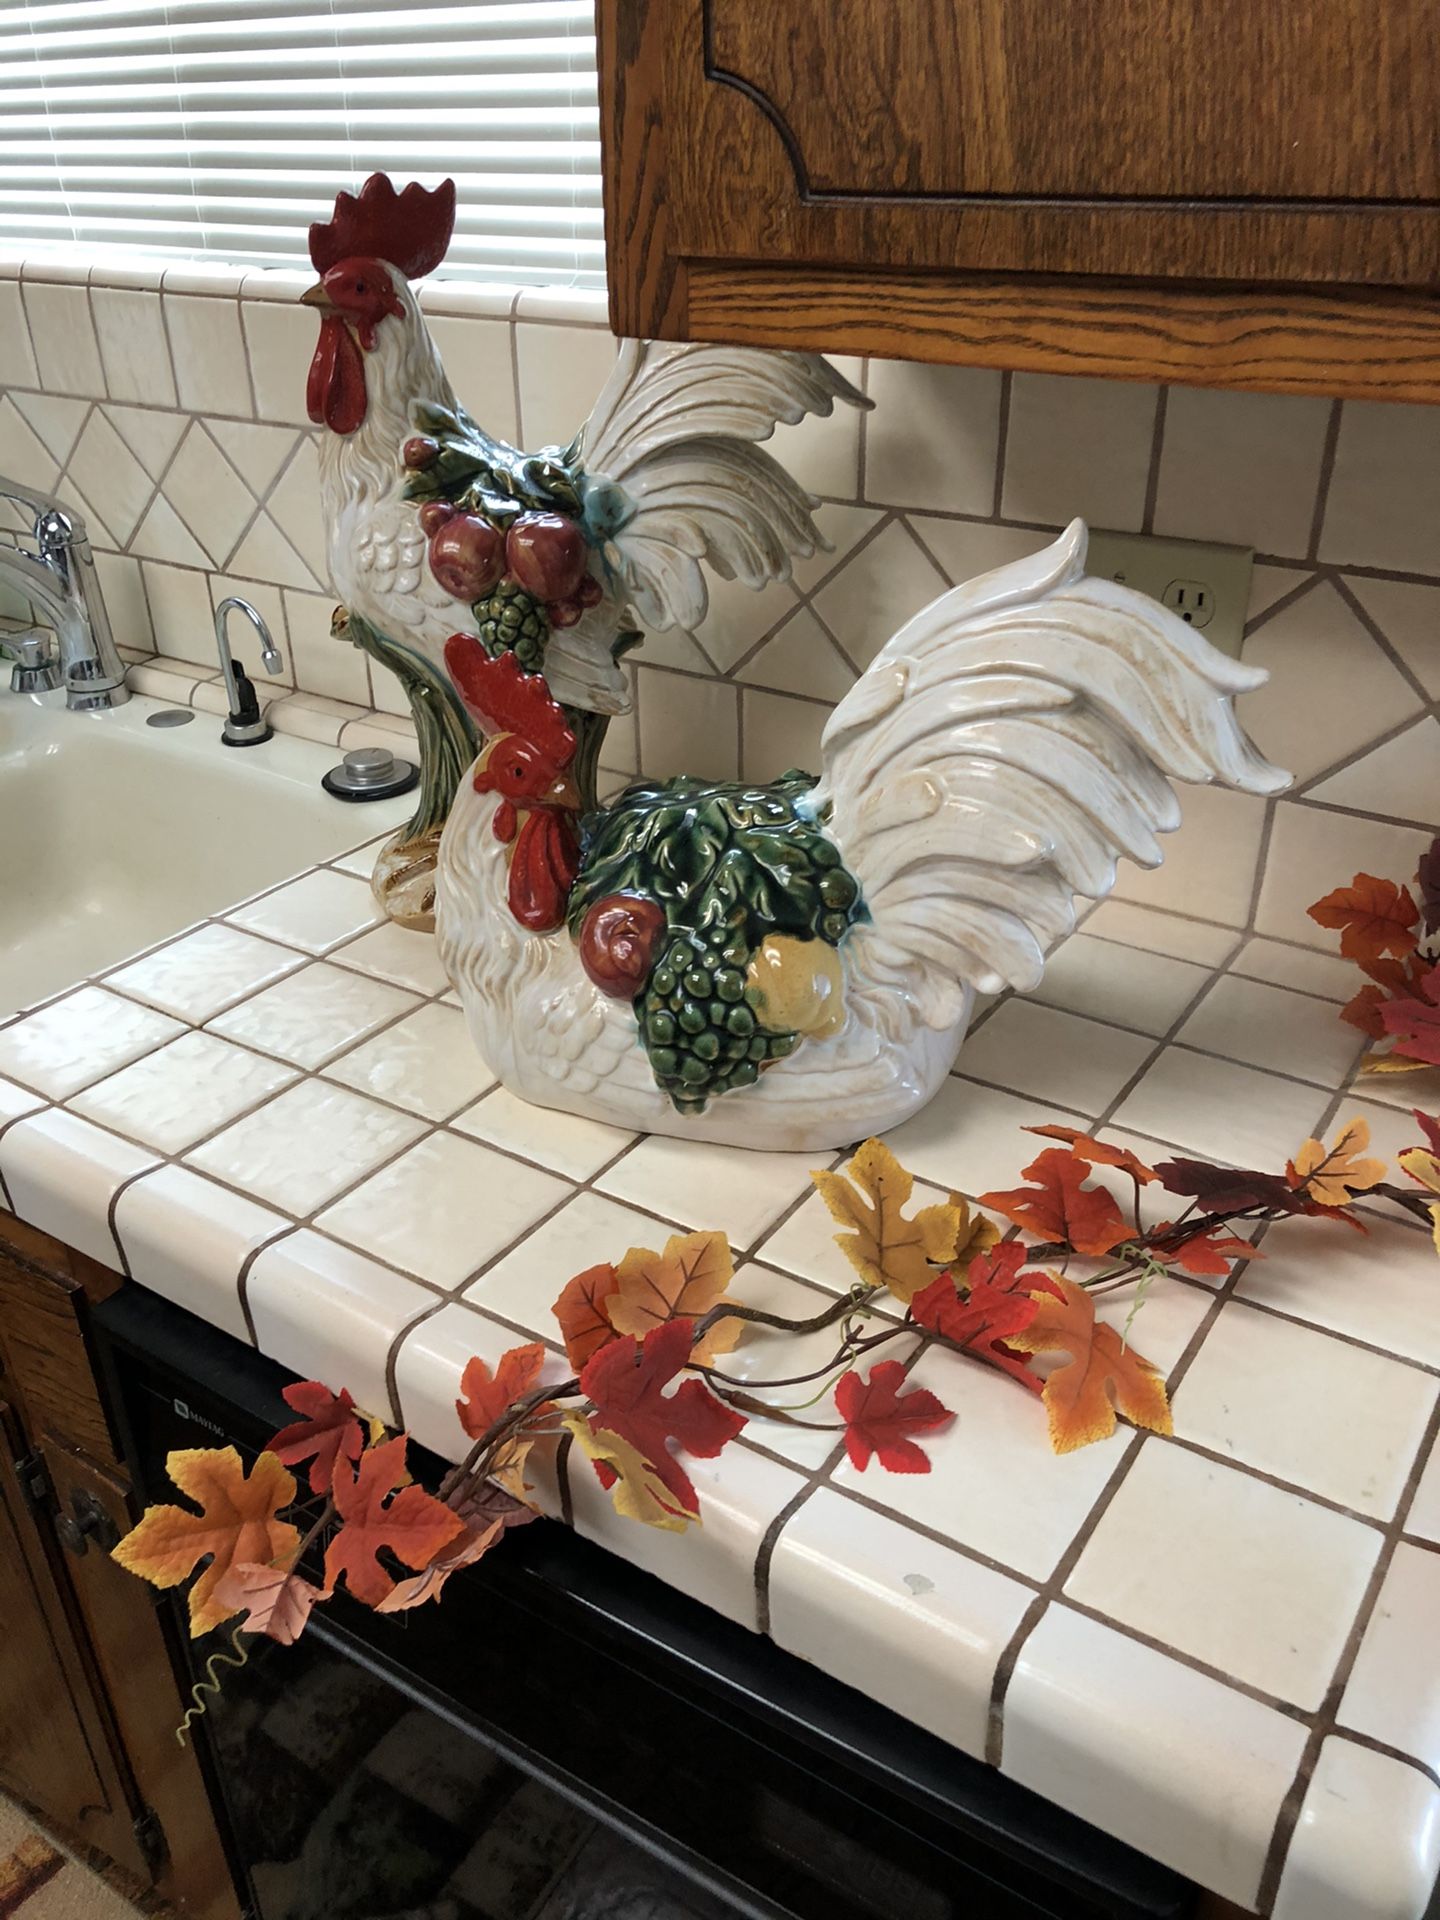 LETS MAKE YOUR THANKSGIVING TABLE LOOK FESTIVE WITH THIS CERAMIC HEN AND ROOSTER